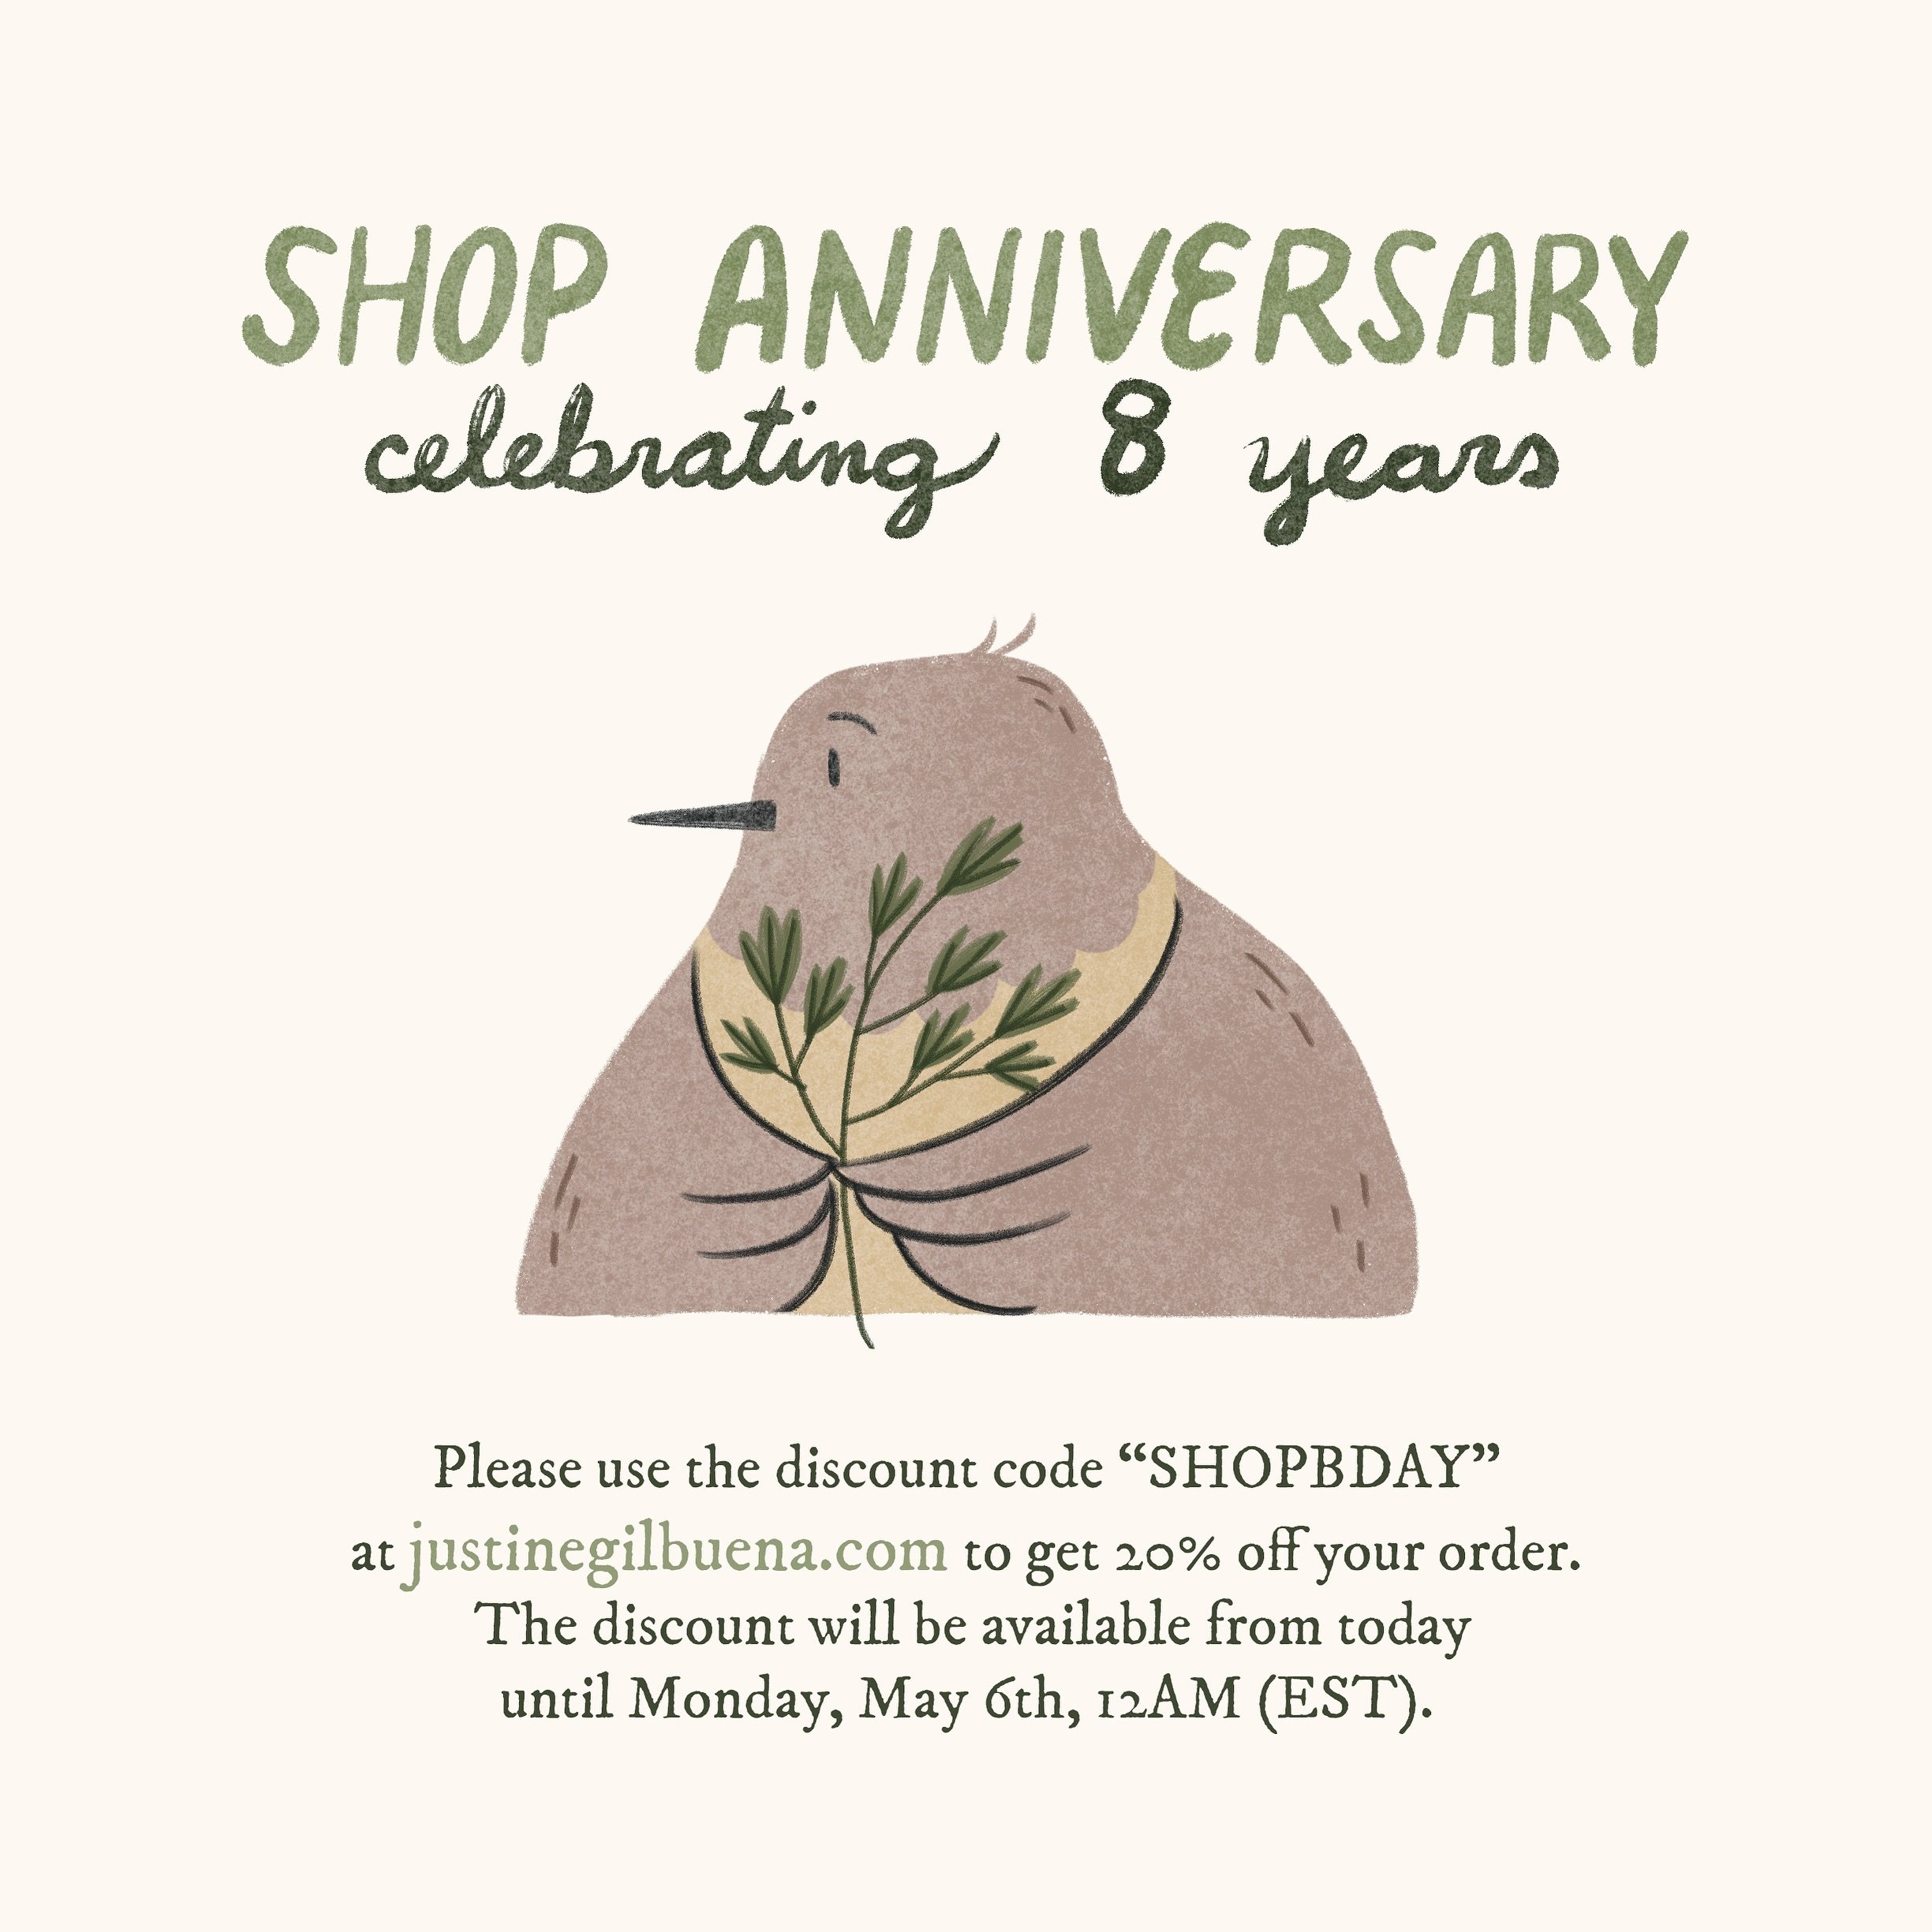 Today is my shop anniversary, I&rsquo;m celebrating 8 years! 

Please use the discount code &ldquo;SHOPBDAY&rdquo; at justinegilbuena.com to get 20% off your order. 
The discount will be available from today until Monday, May 6th, 12AM (EST). 

I&rsq